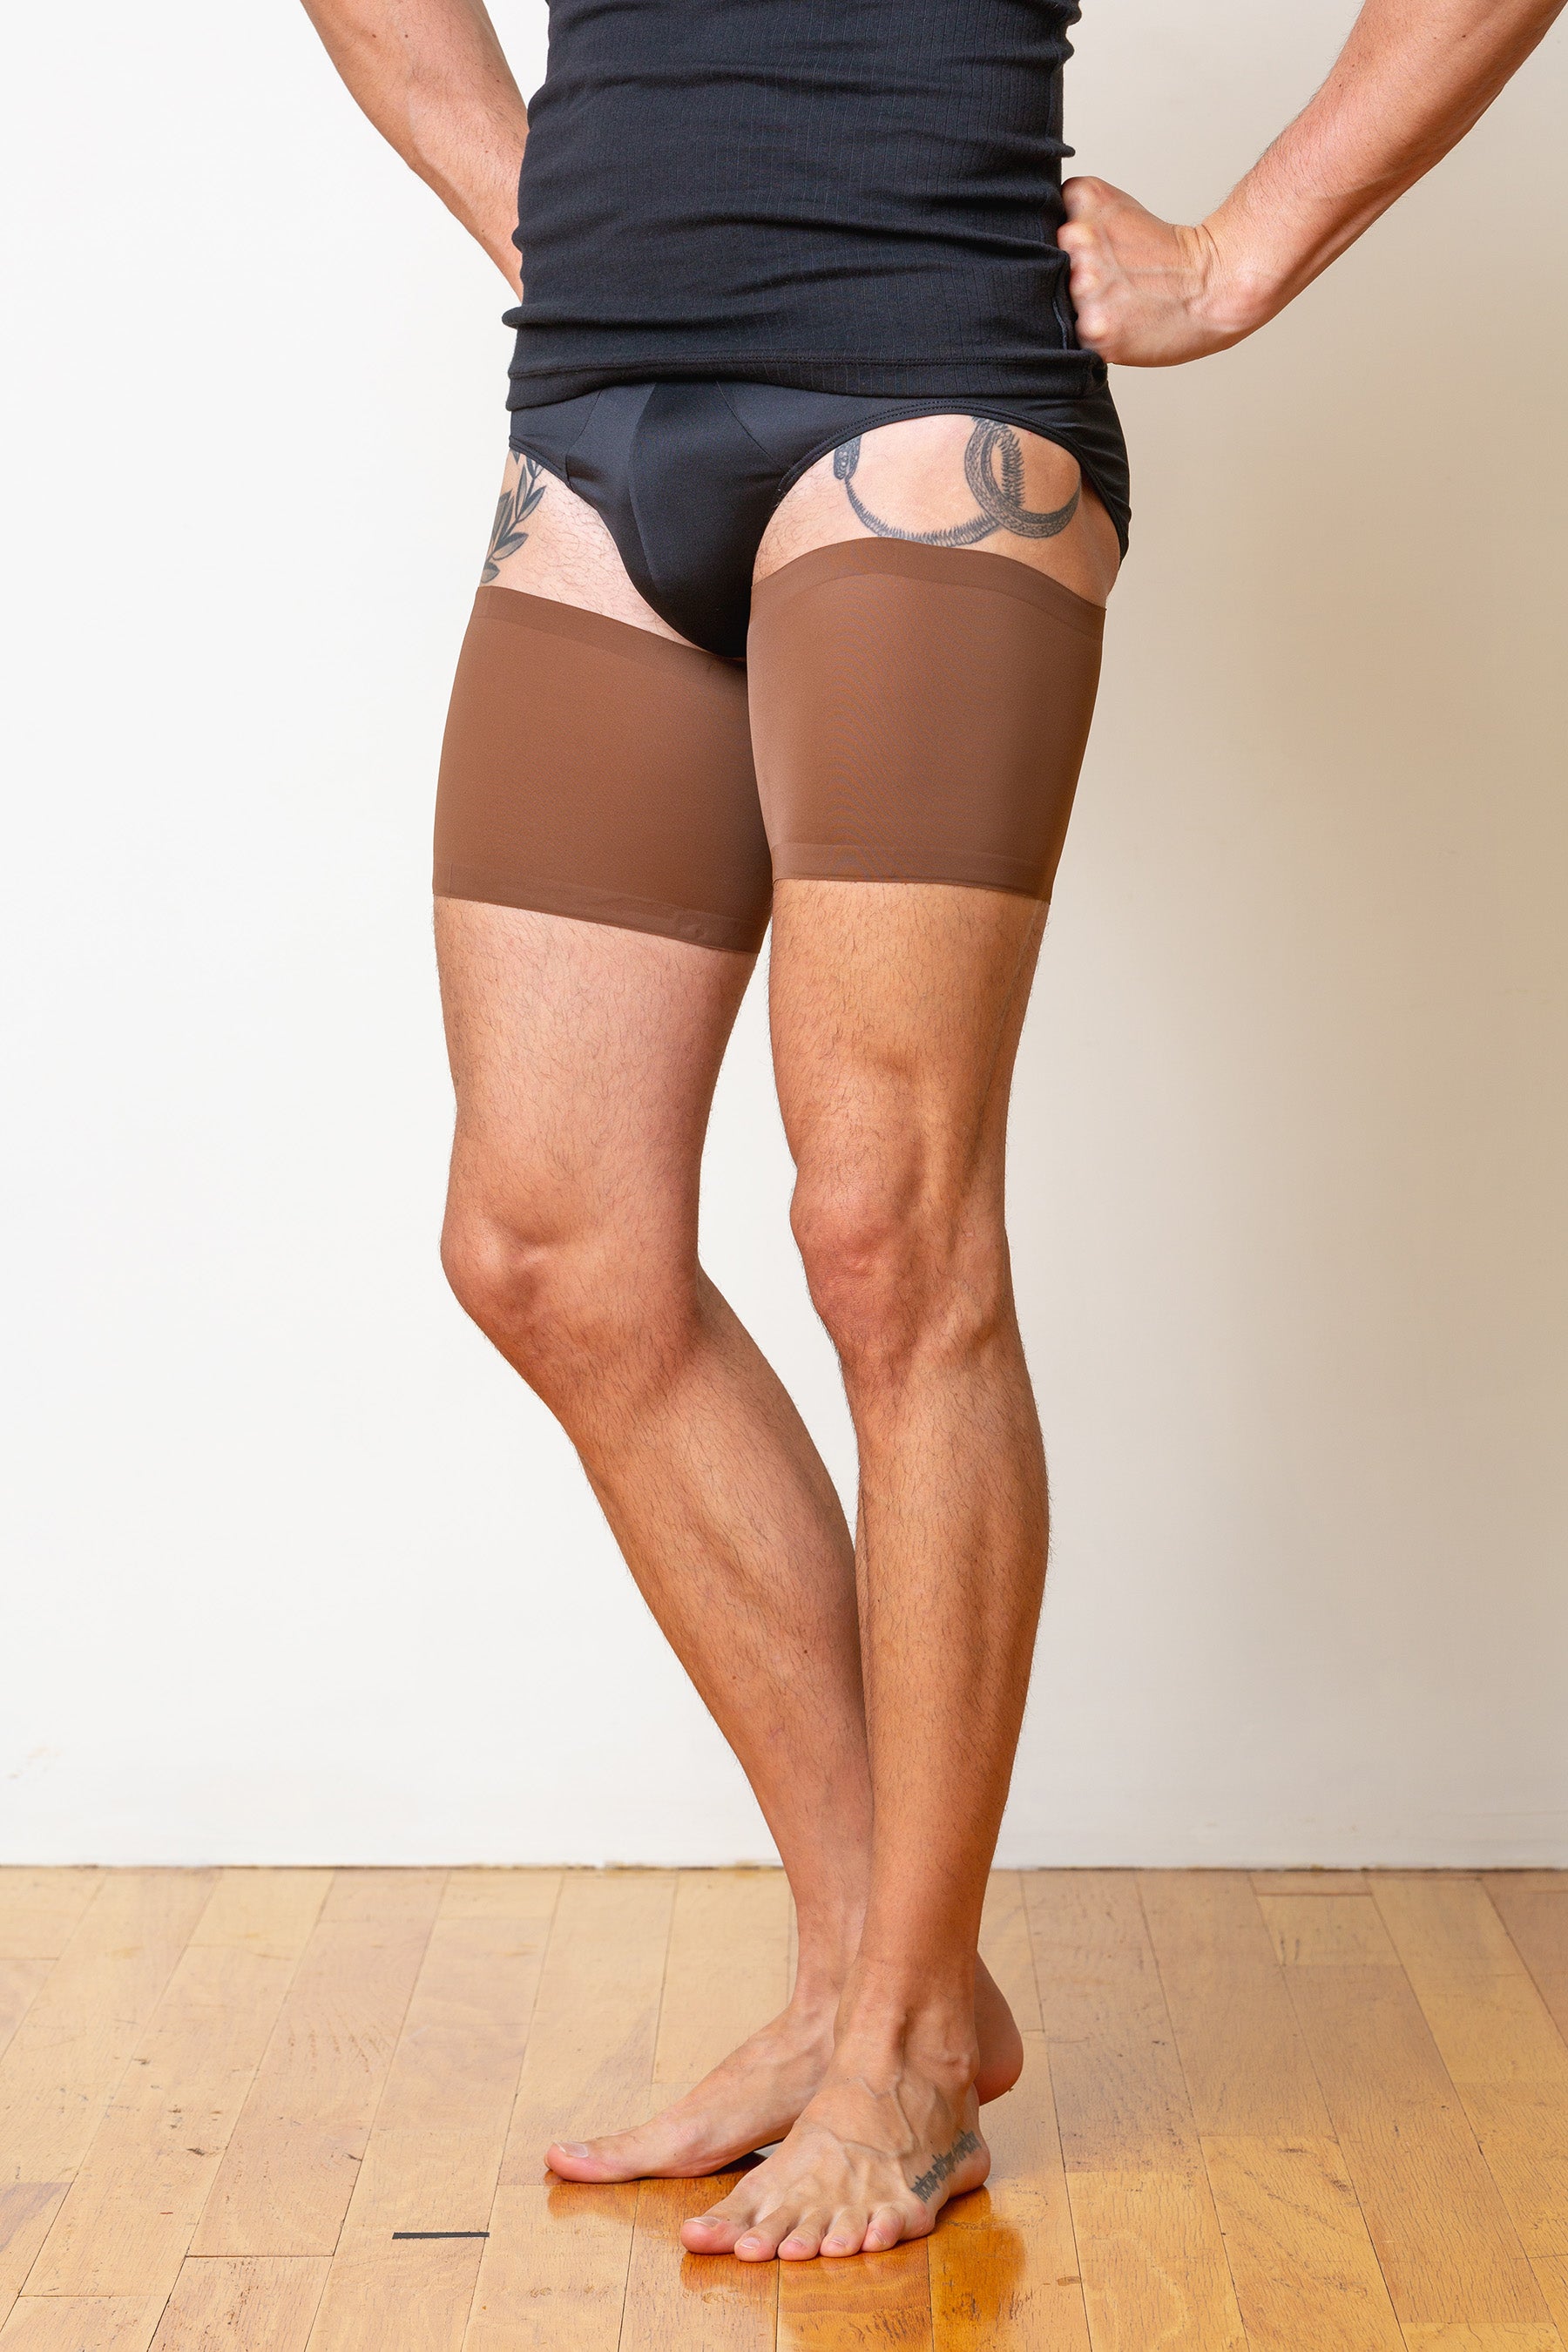 Bandelettes® Performance Thigh Bands for Men | Chocolate